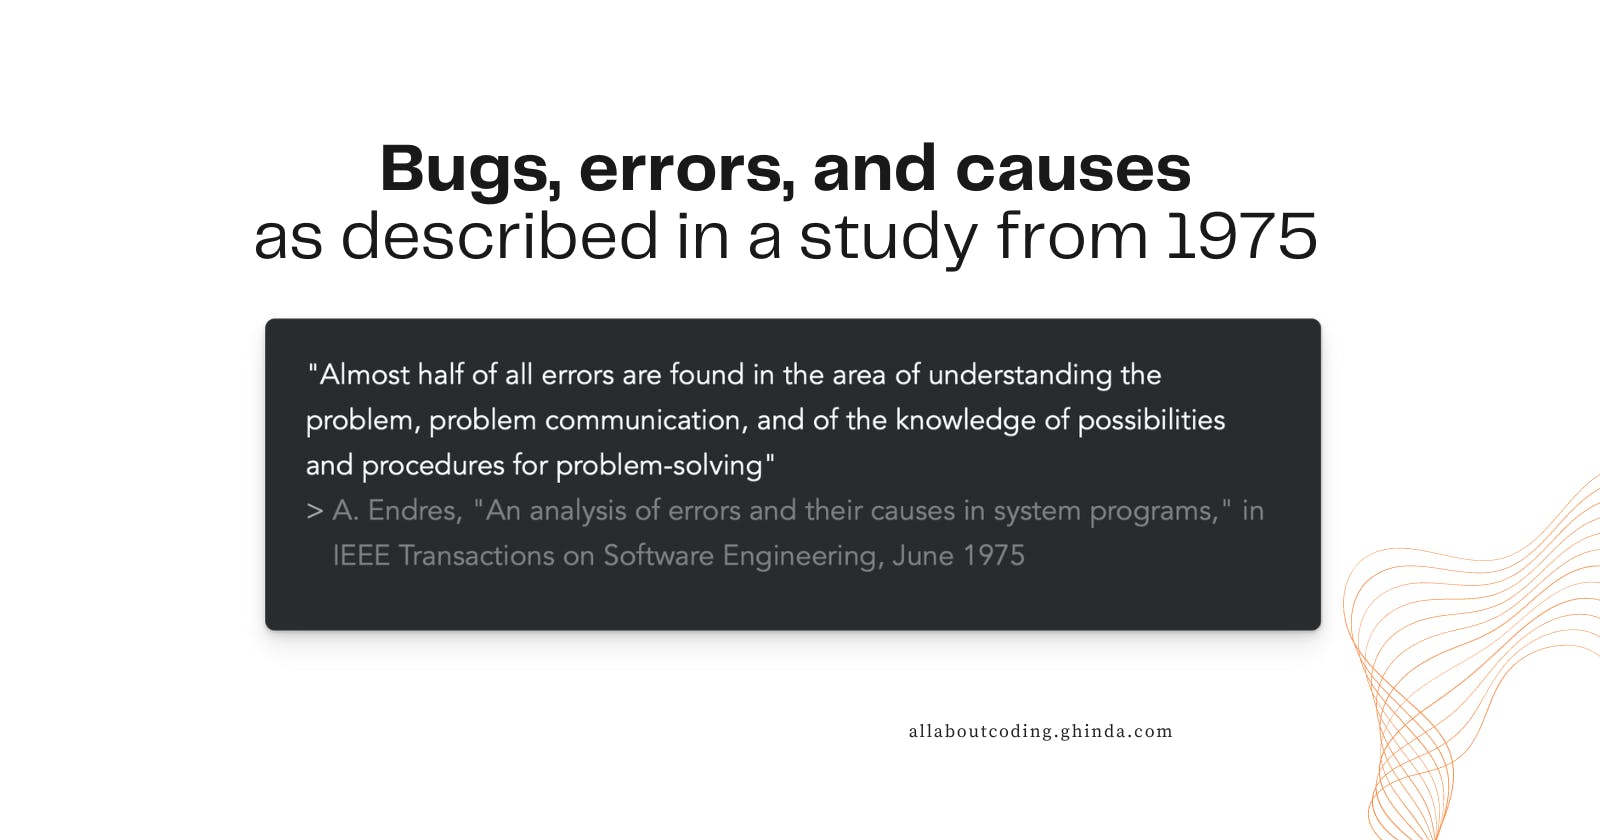 Bugs, errors and causes from an 1975 paper